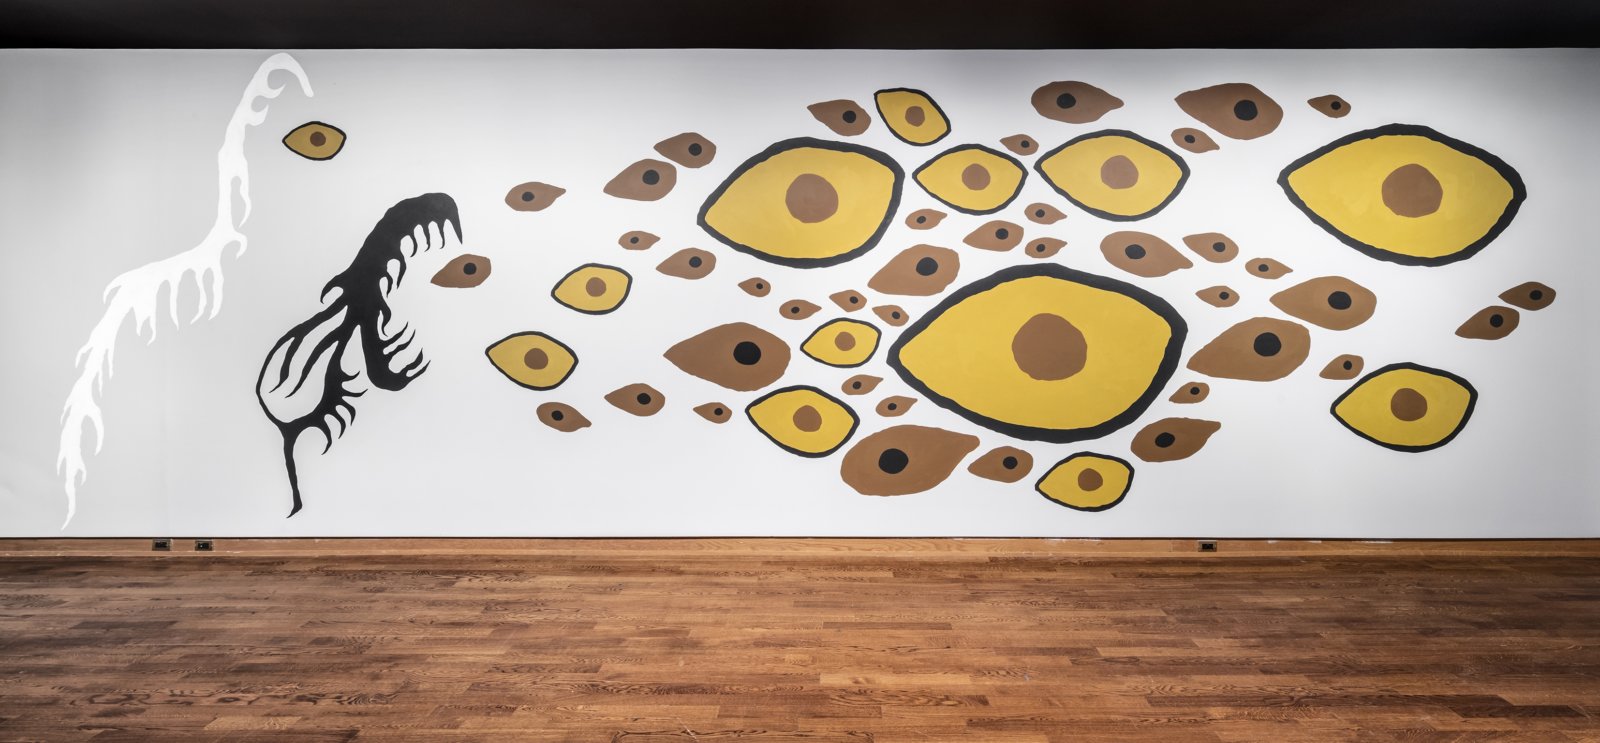 Duane Linklater, Earth Mother Hair, Indian Hair, and Earth Mother Eyes, Indian Eyes, Animal Eyes, 2017, paint on interior wall of the Art Museum at the University of Toronto, from a series of small paintings of eyes and hair based on a photo of Norval Morrisseau’s Earth Mother and Her Children (1967), painting labour by John Abrams, absence of the artist, dimensions variable. Installation view, In Dialogue, Art Museum, Toronto, Canada, 2017